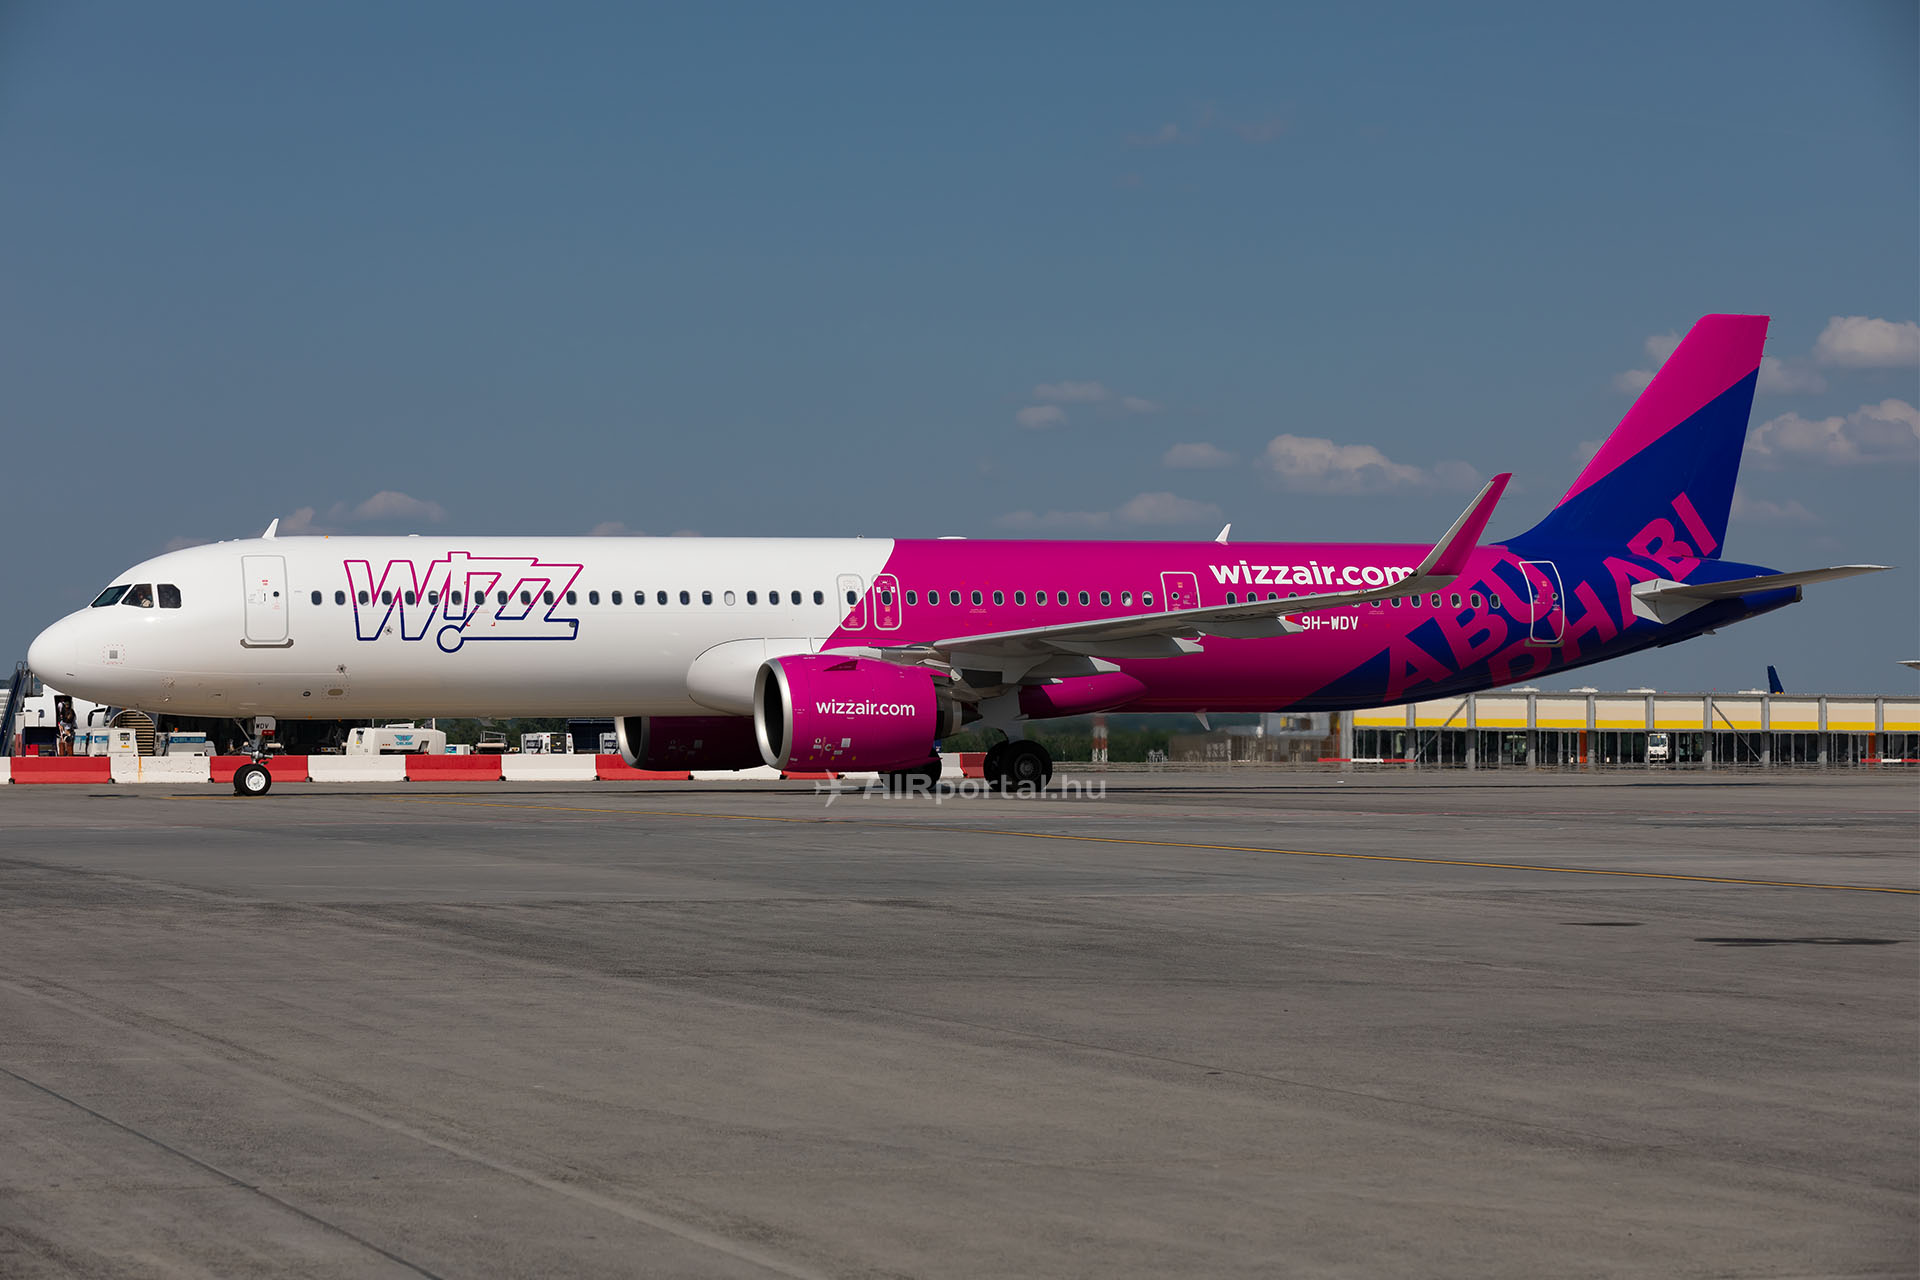 Wizz Air Abu Dhabi is replacing its Neos with the classic A321